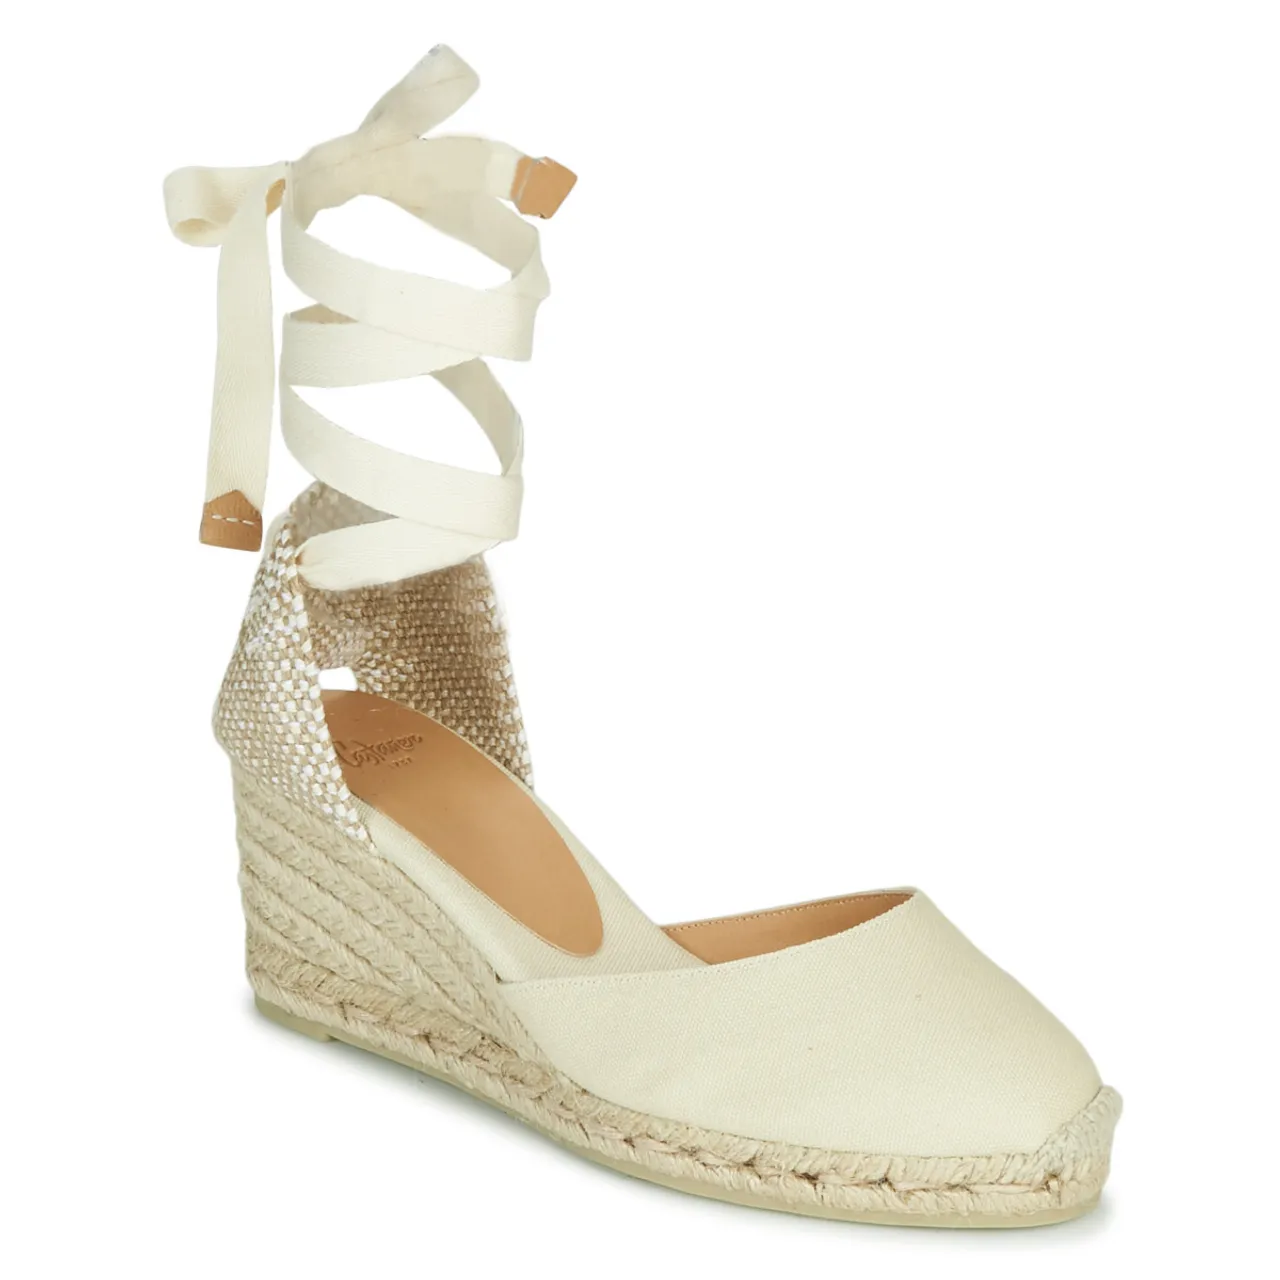 Castaner  CARINA  women's Espadrilles / Casual Shoes in White